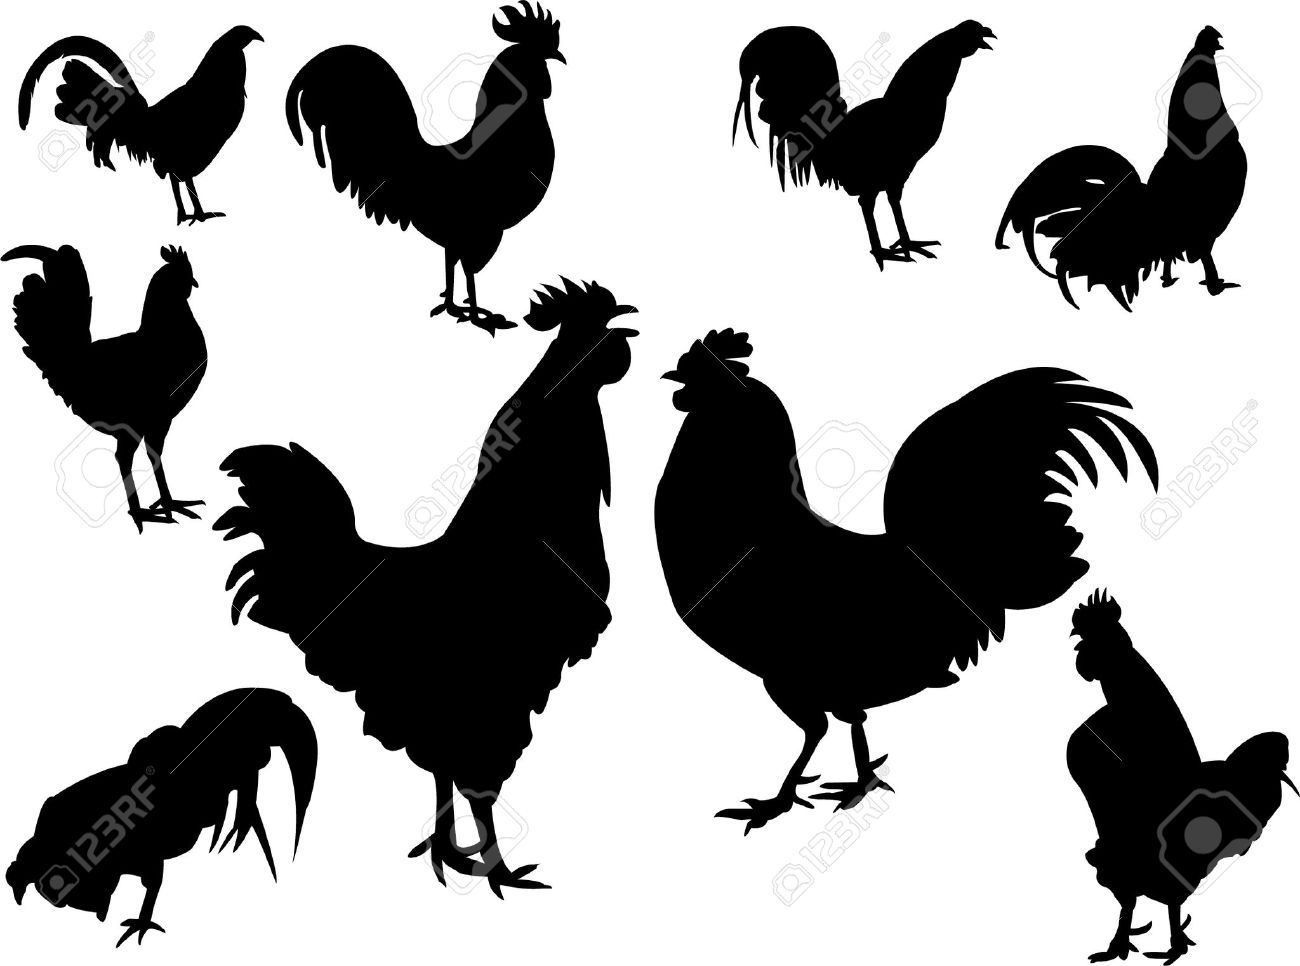 Gallos Finos clipart #5, Download drawings